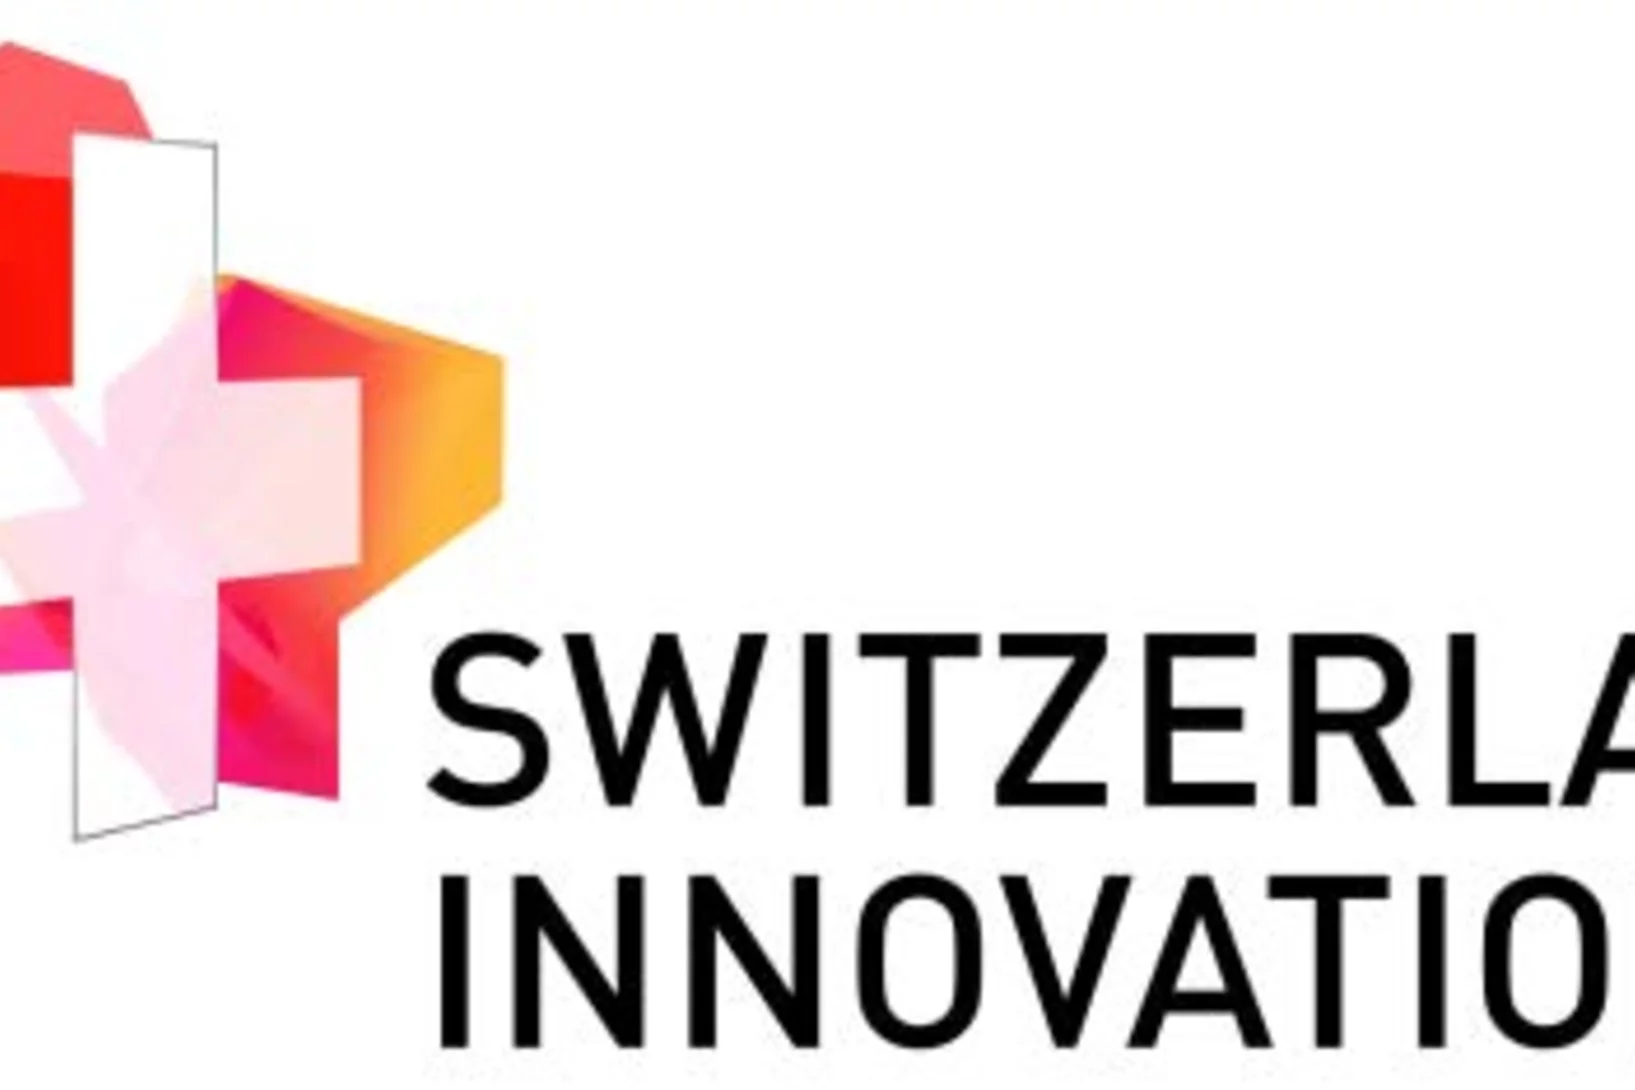 Switzerland Innovation launches first call for proposals: Tech4Impact